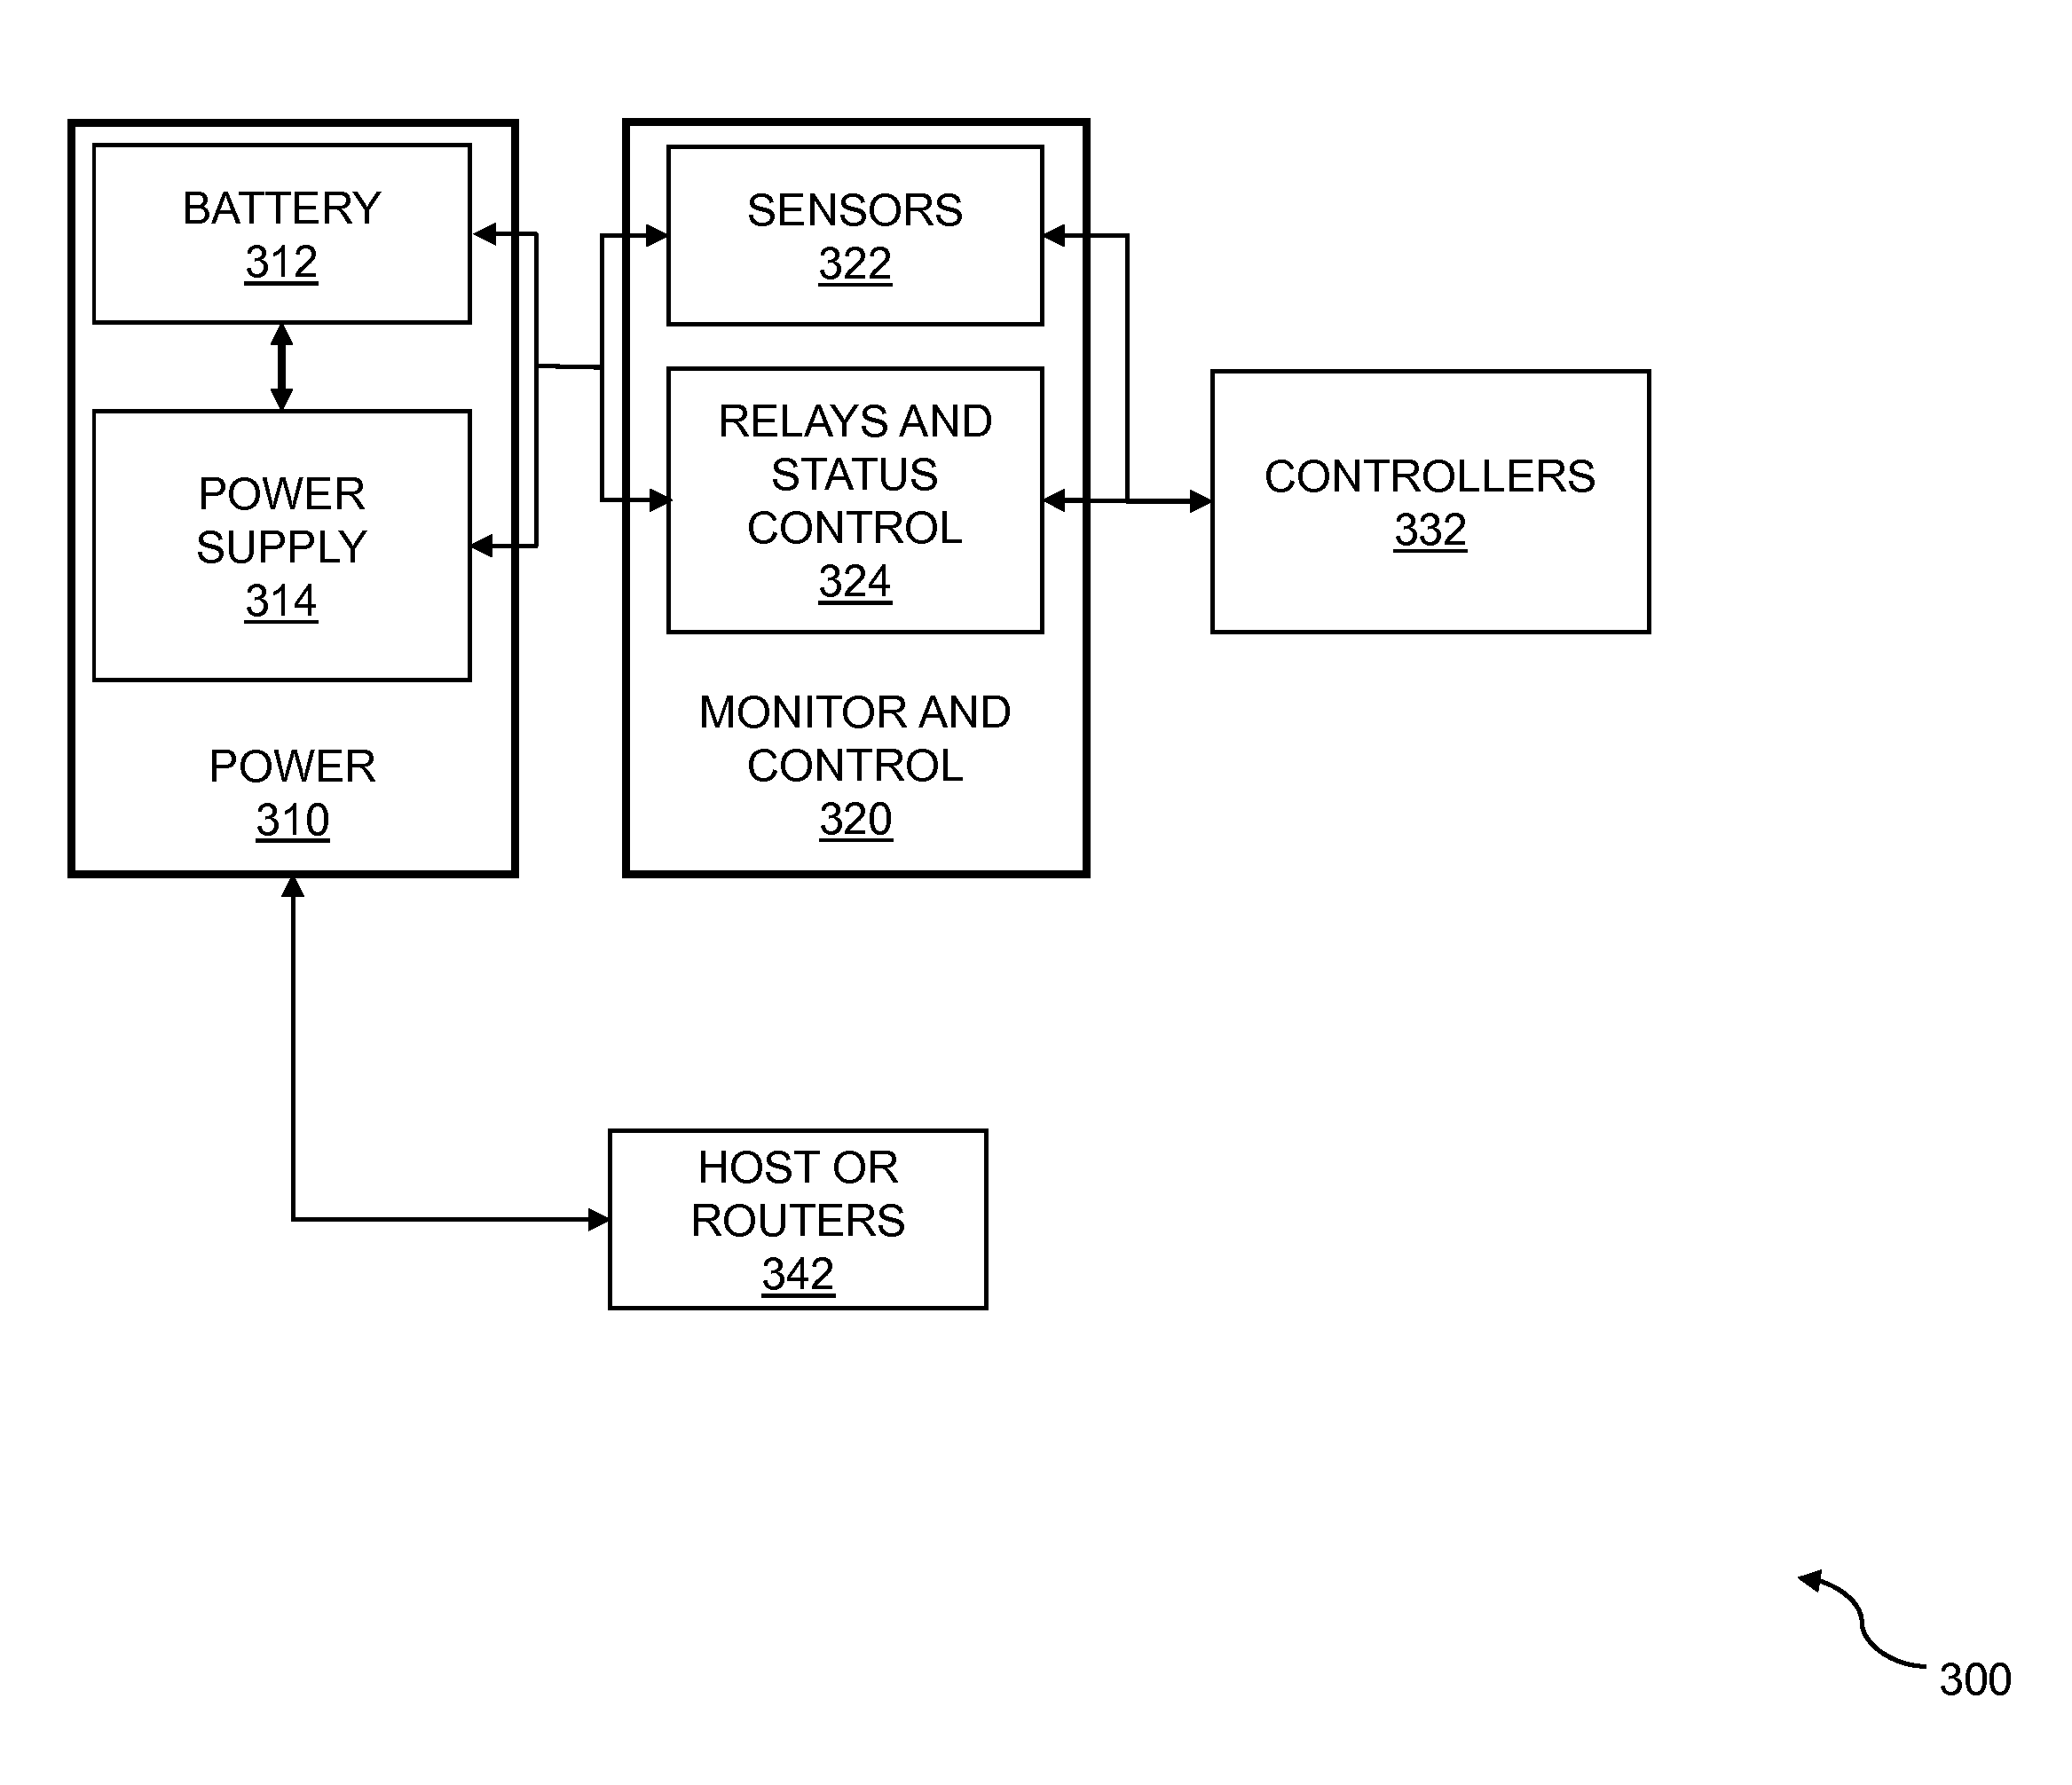 Multi-level data center consolidated power control